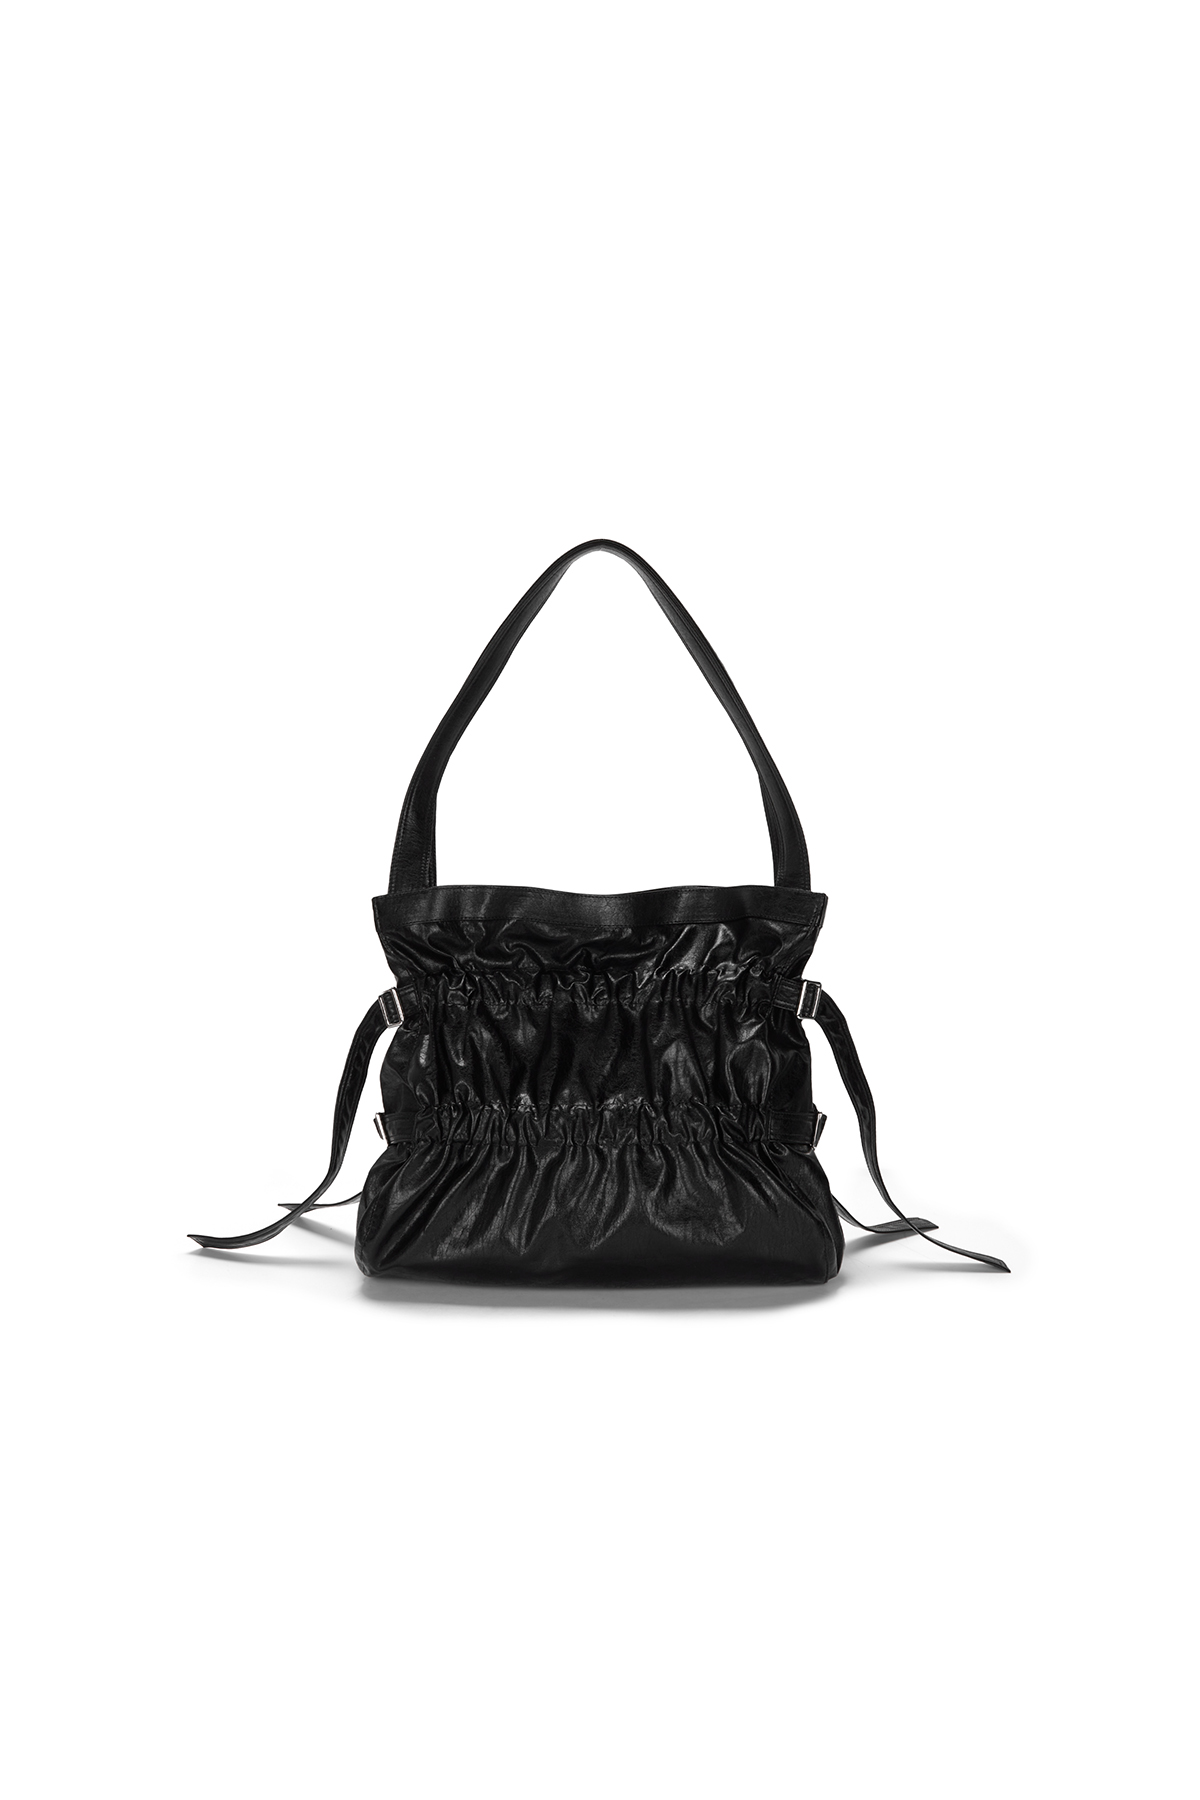 FAUX LEATHER SEASHELL BAG IN BLACK